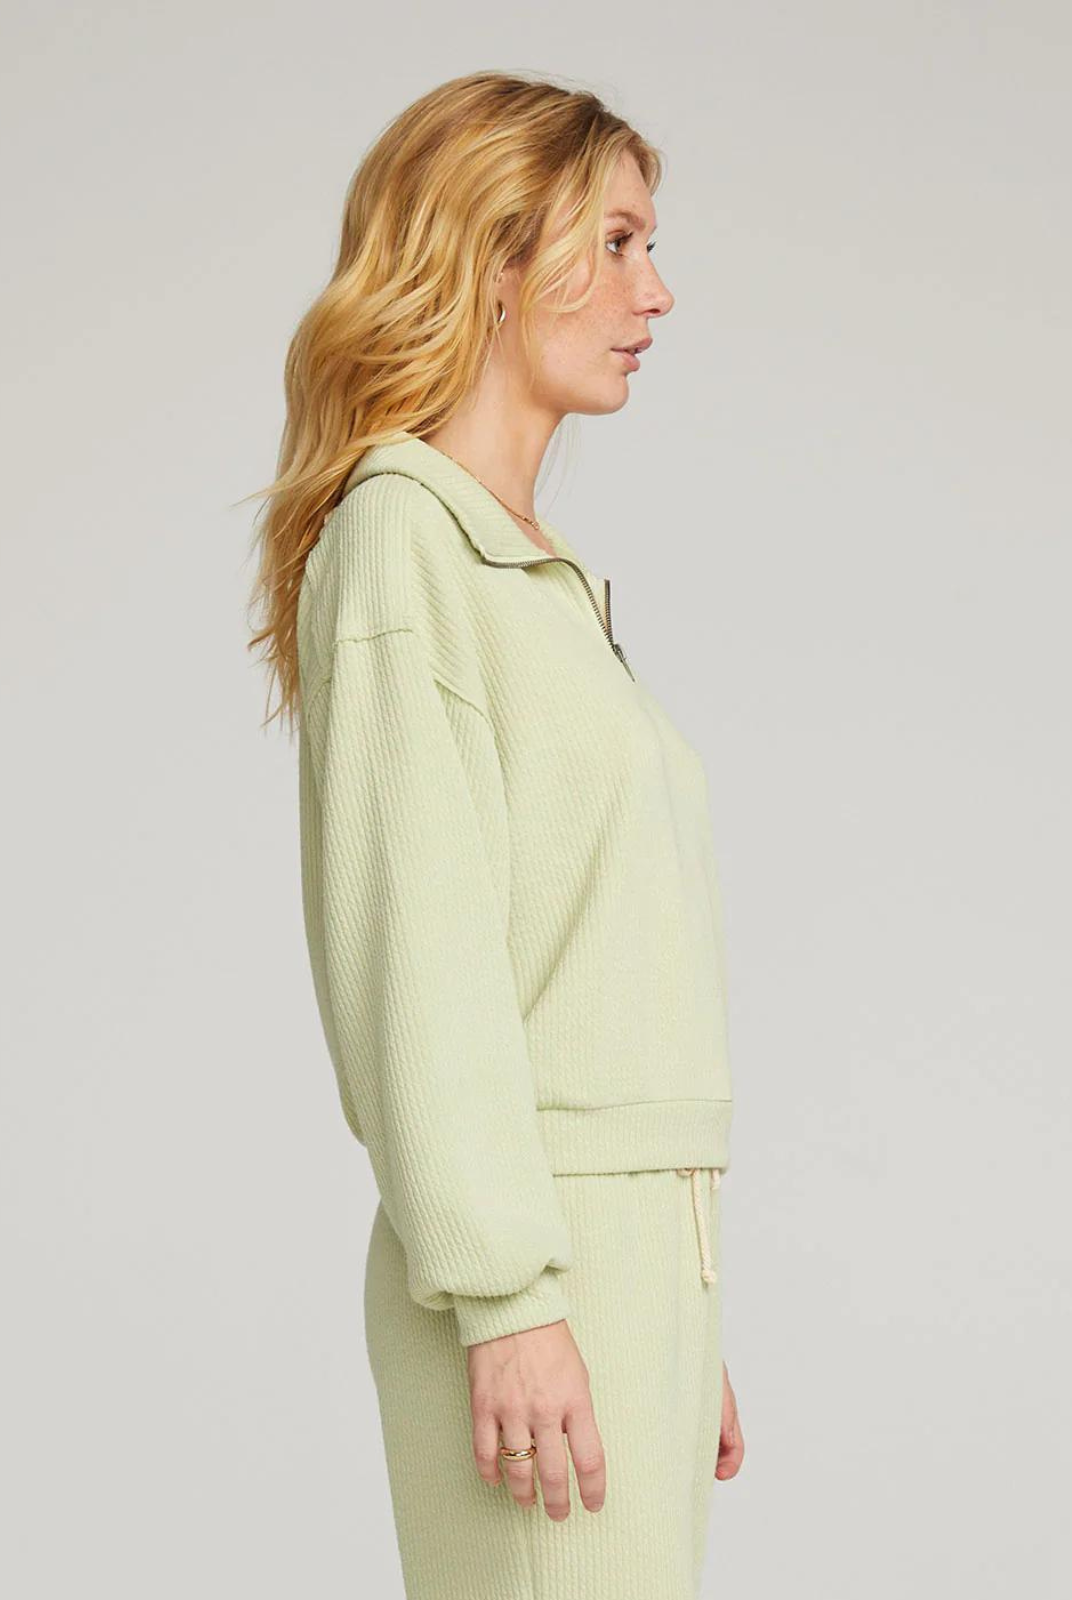 Saltwater Luxe Half Zip Pullover - Limelight. Liven up your spring wardrobe with a burst of color in our limelight Half Zip Pullover. Crafted in a vivid green hue, this piece perfectly blends comfort with style.